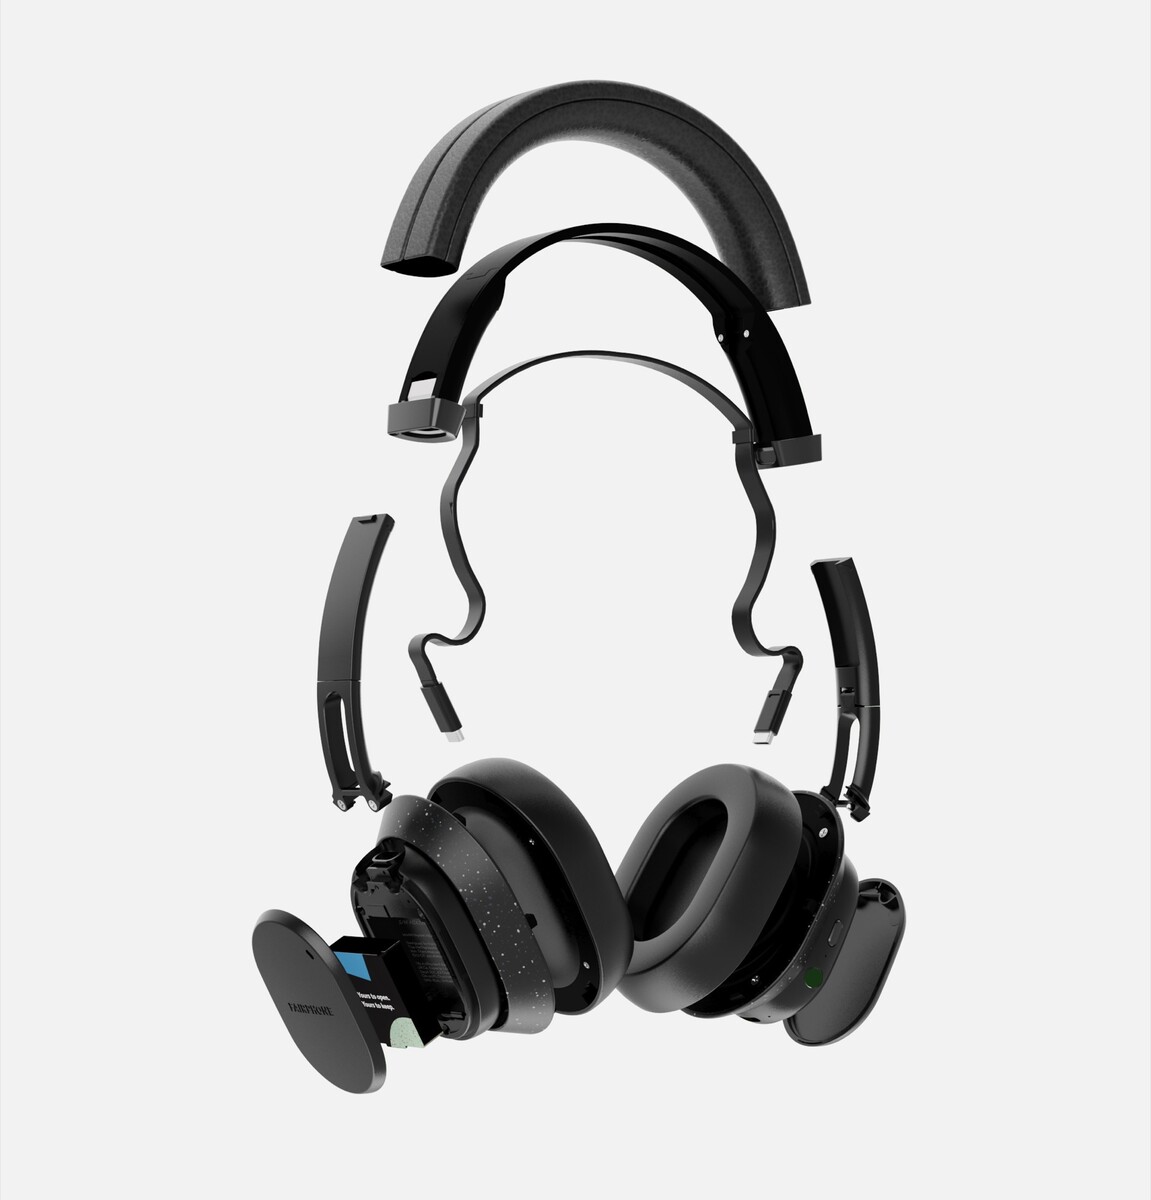 over-ear features debuts with XL Fairbuds new News headphones as Fairphone premium sustainable NotebookCheck.net -